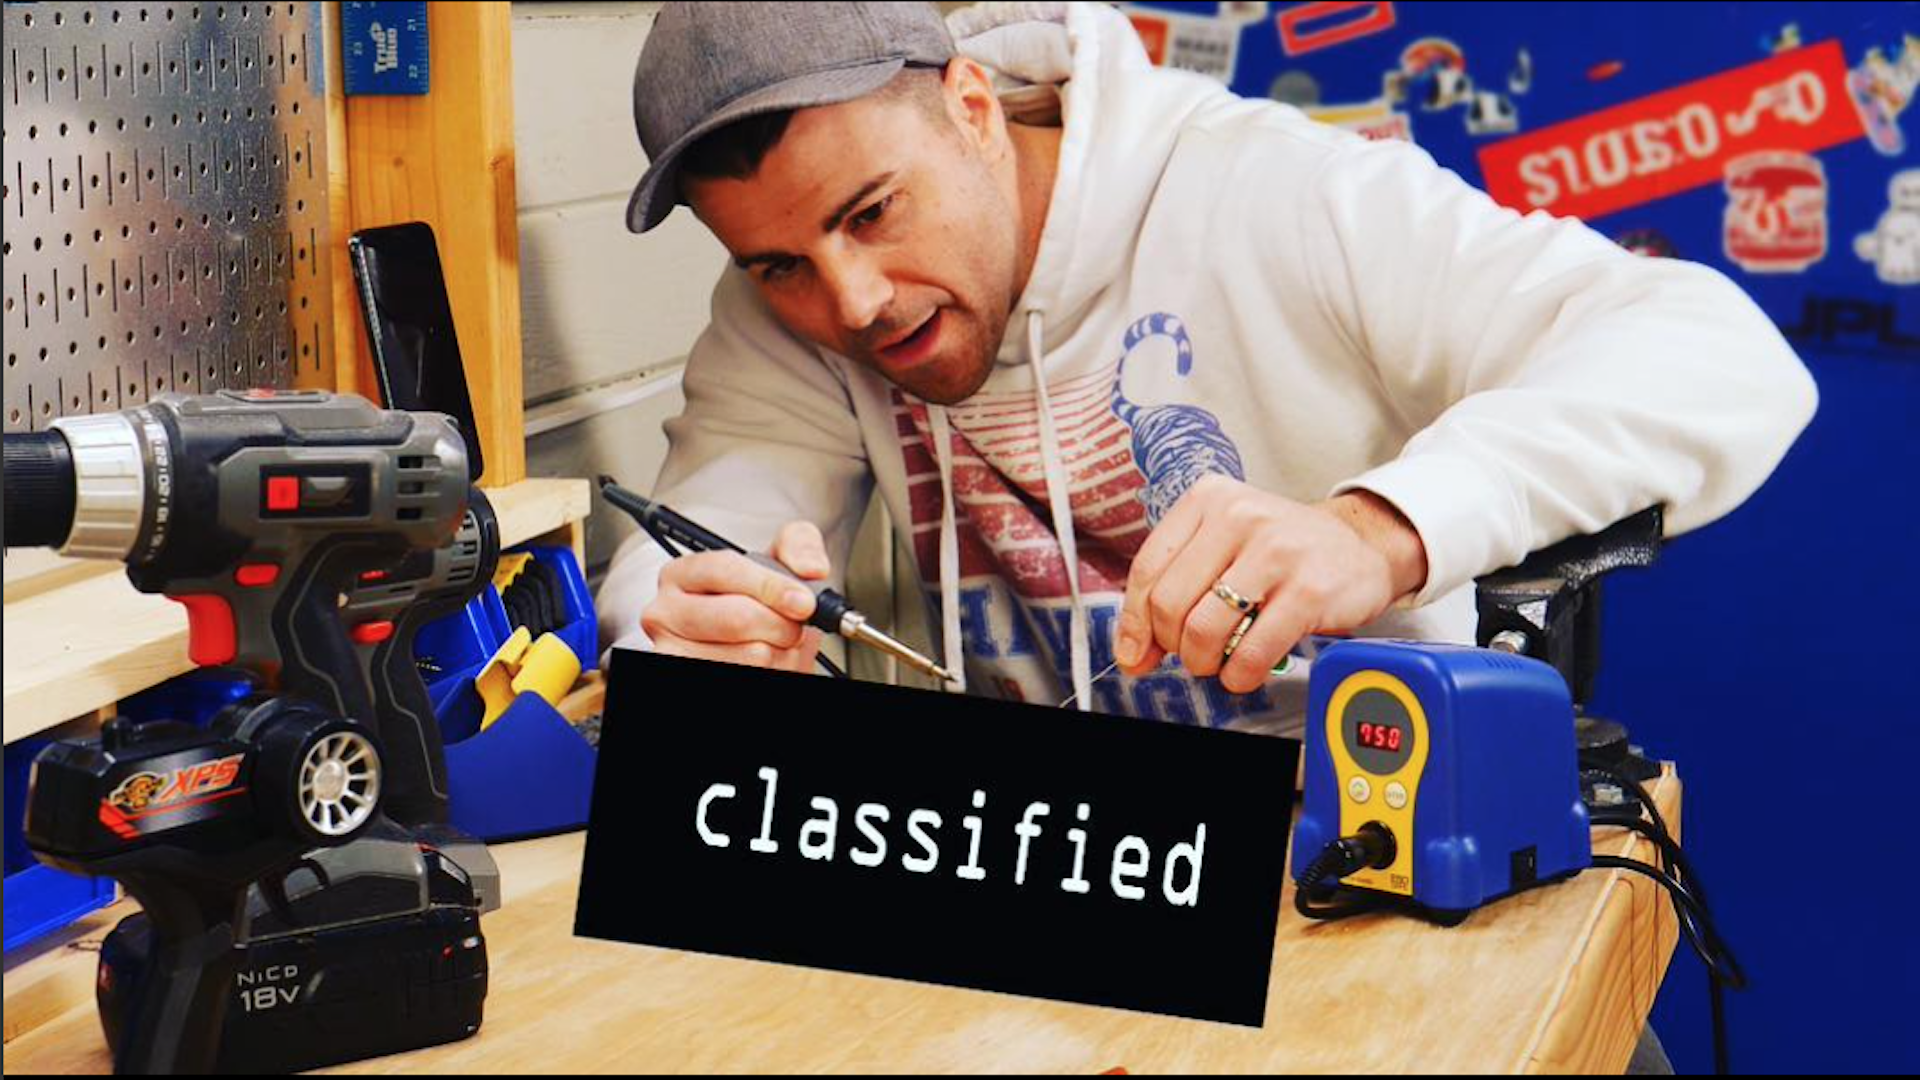 Mark Rober working on something 'classified'